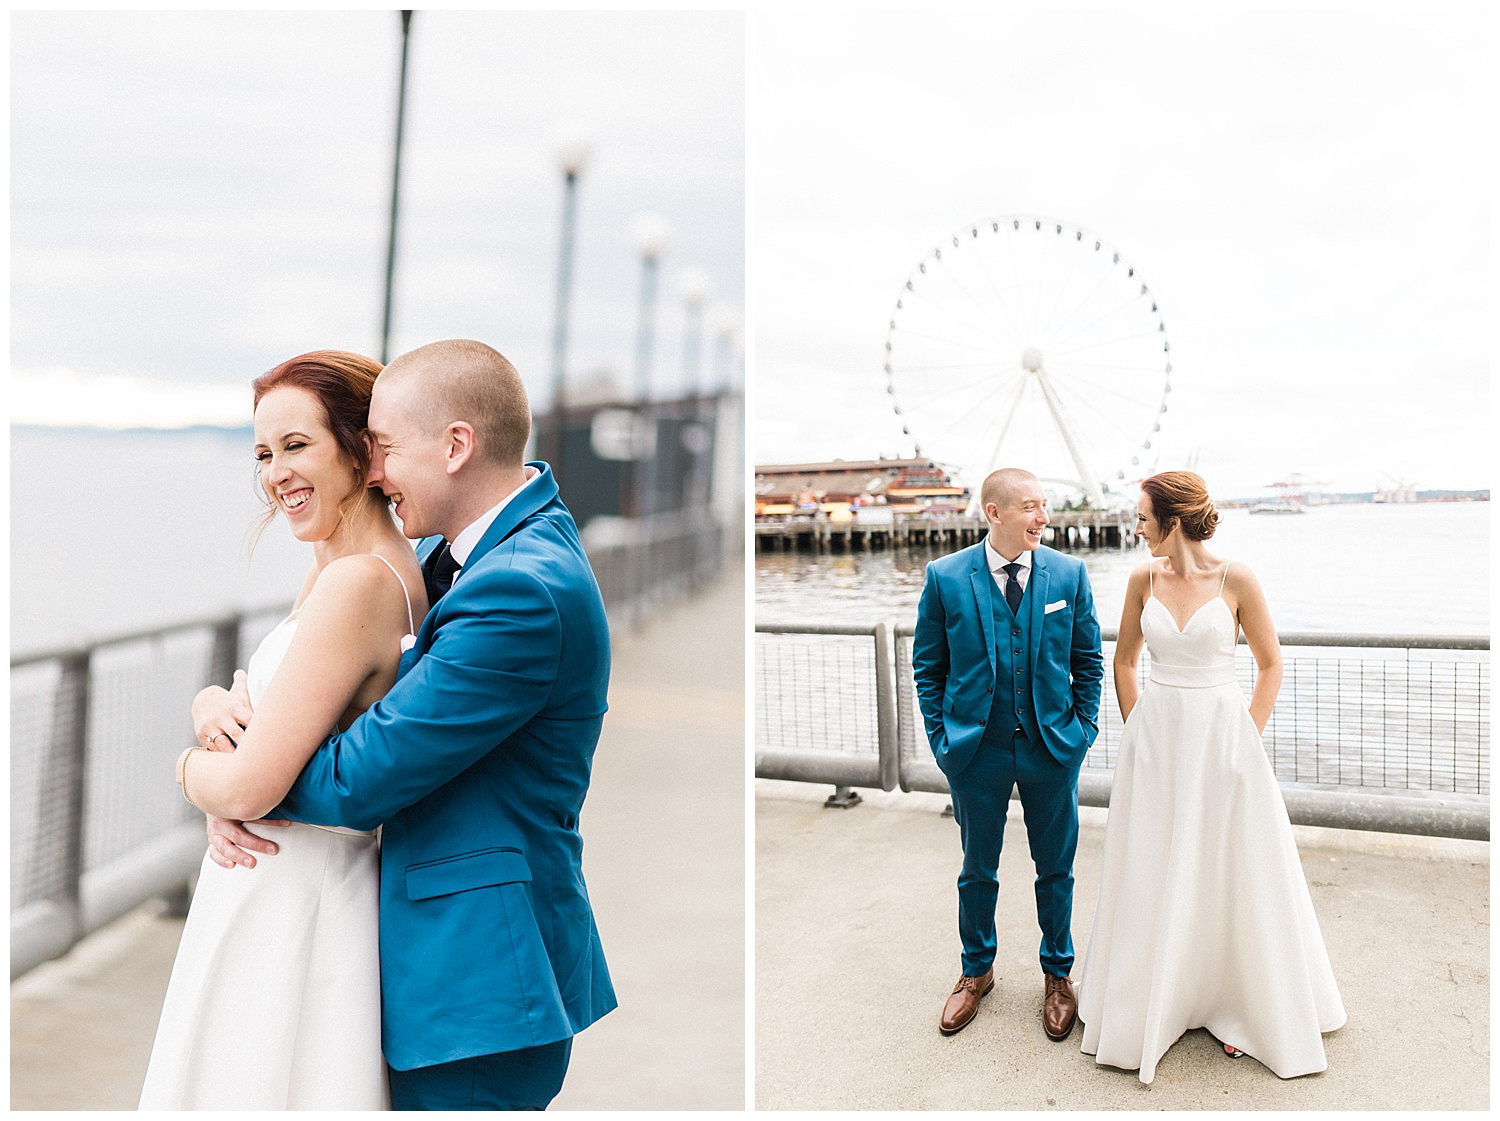 Seattle Courthouse Elopement. Pike Place, great wheel, gas works